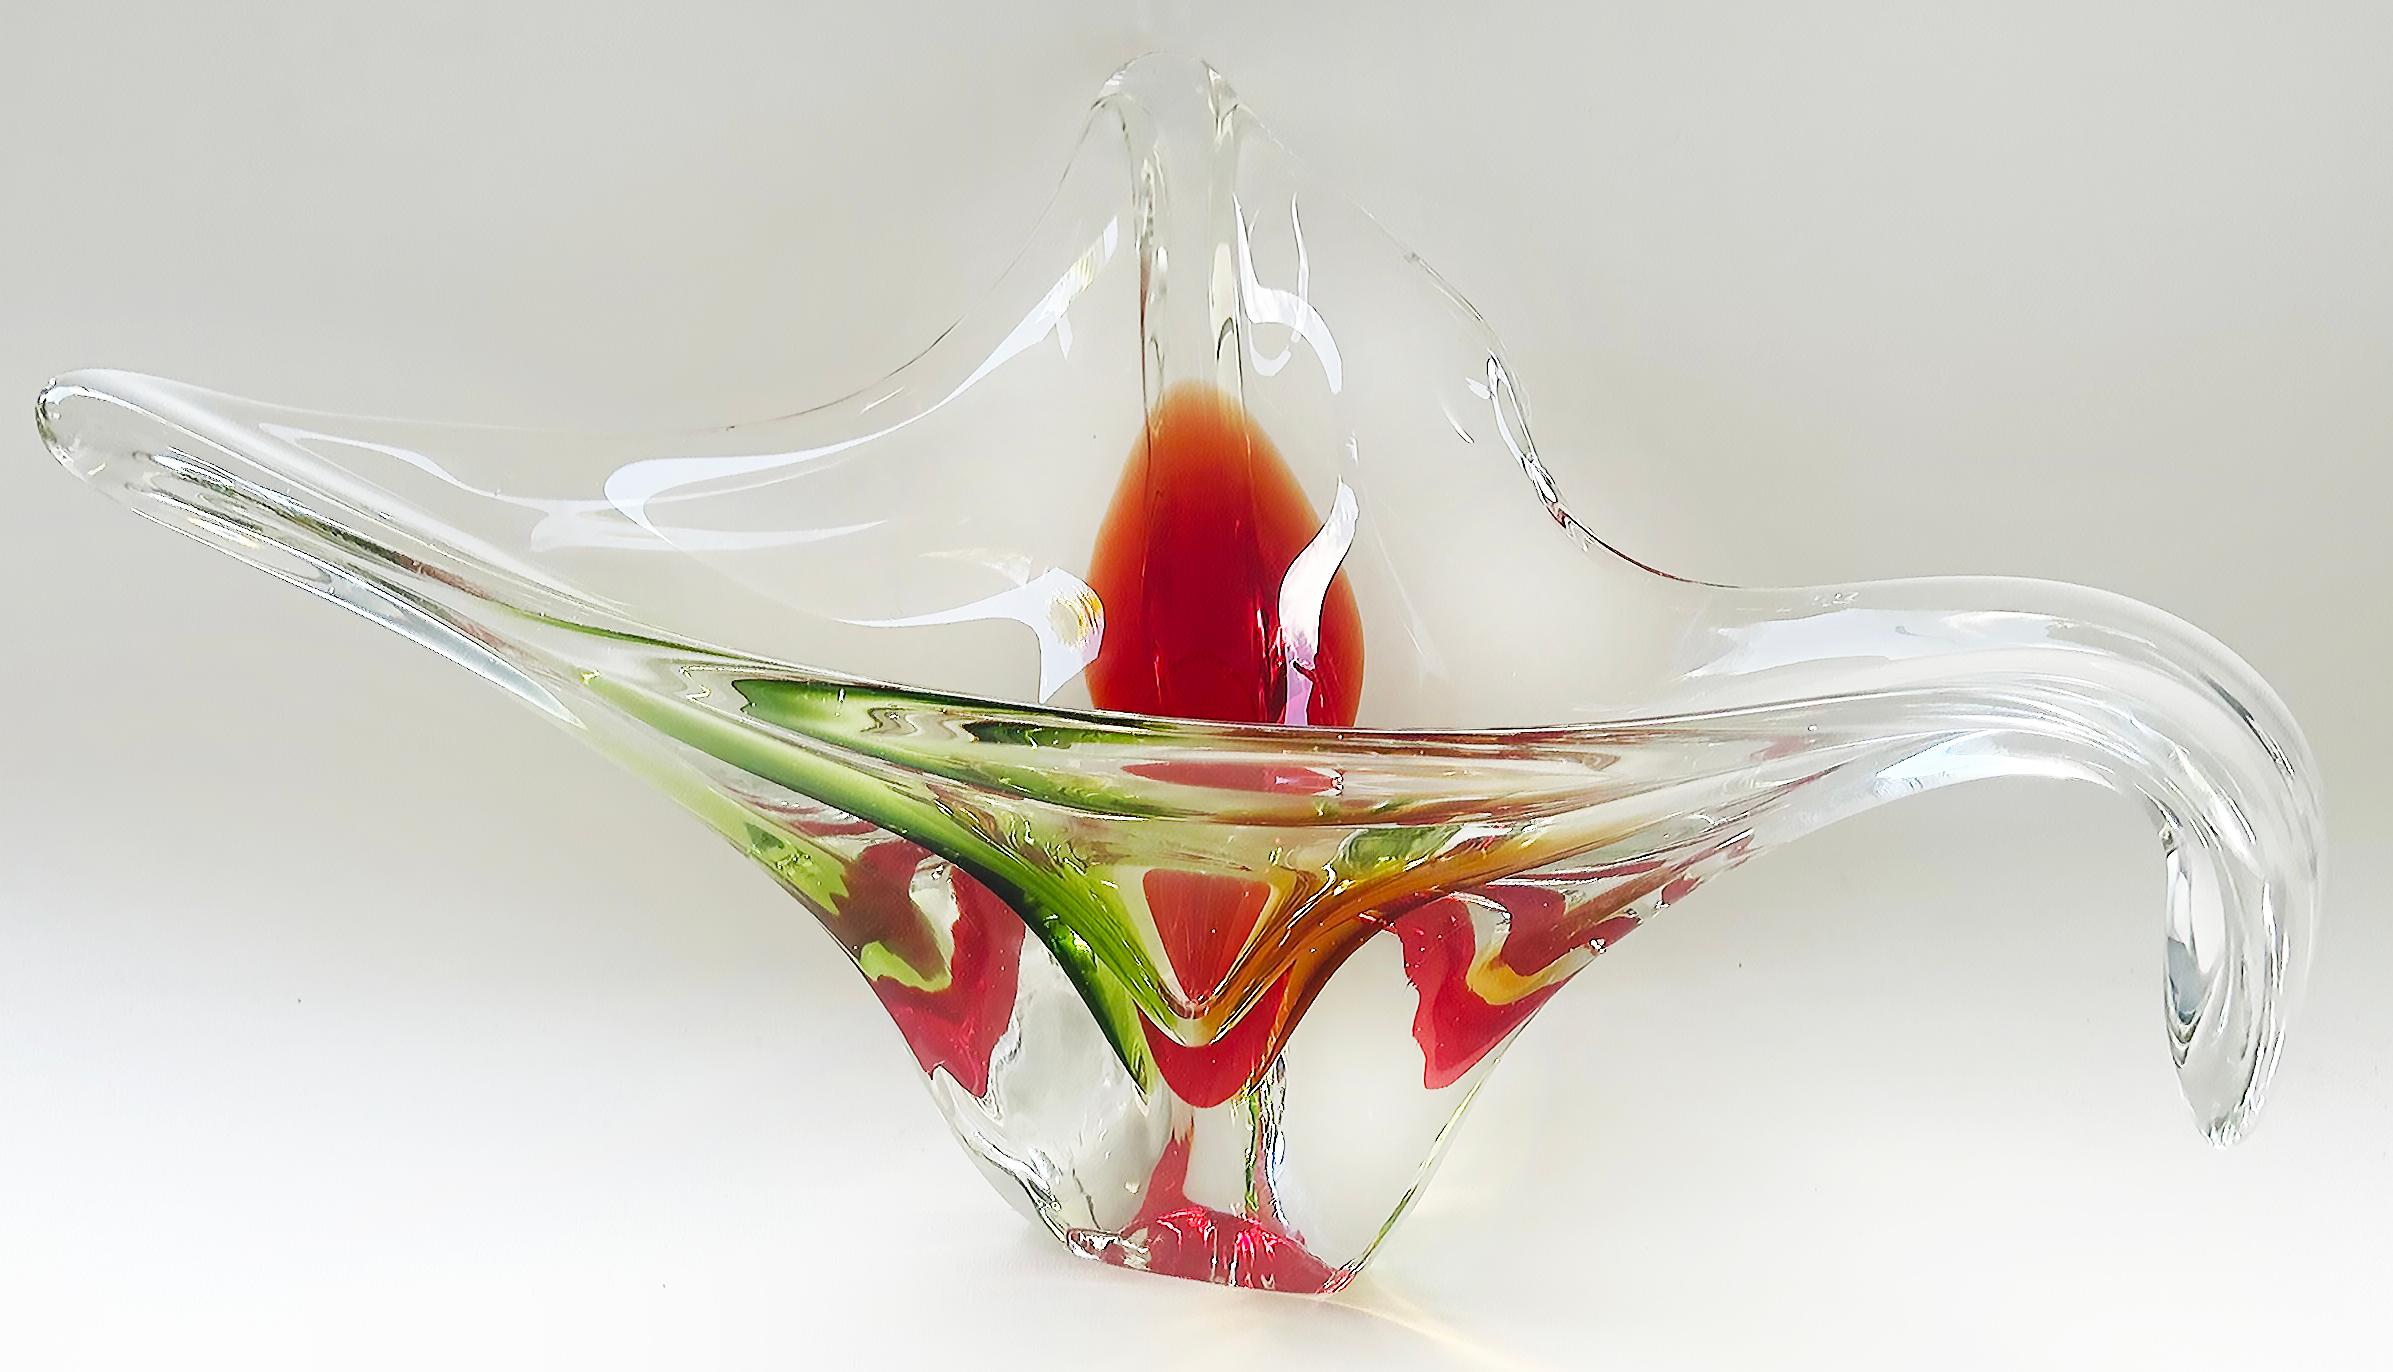 Large Murano Centerpiece Freeform Bowl with Red, Green and Amber to Clear Glass

Offered for sale is a large Murano glass free-form centerpiece bowl with red, green, amber and clear glass.